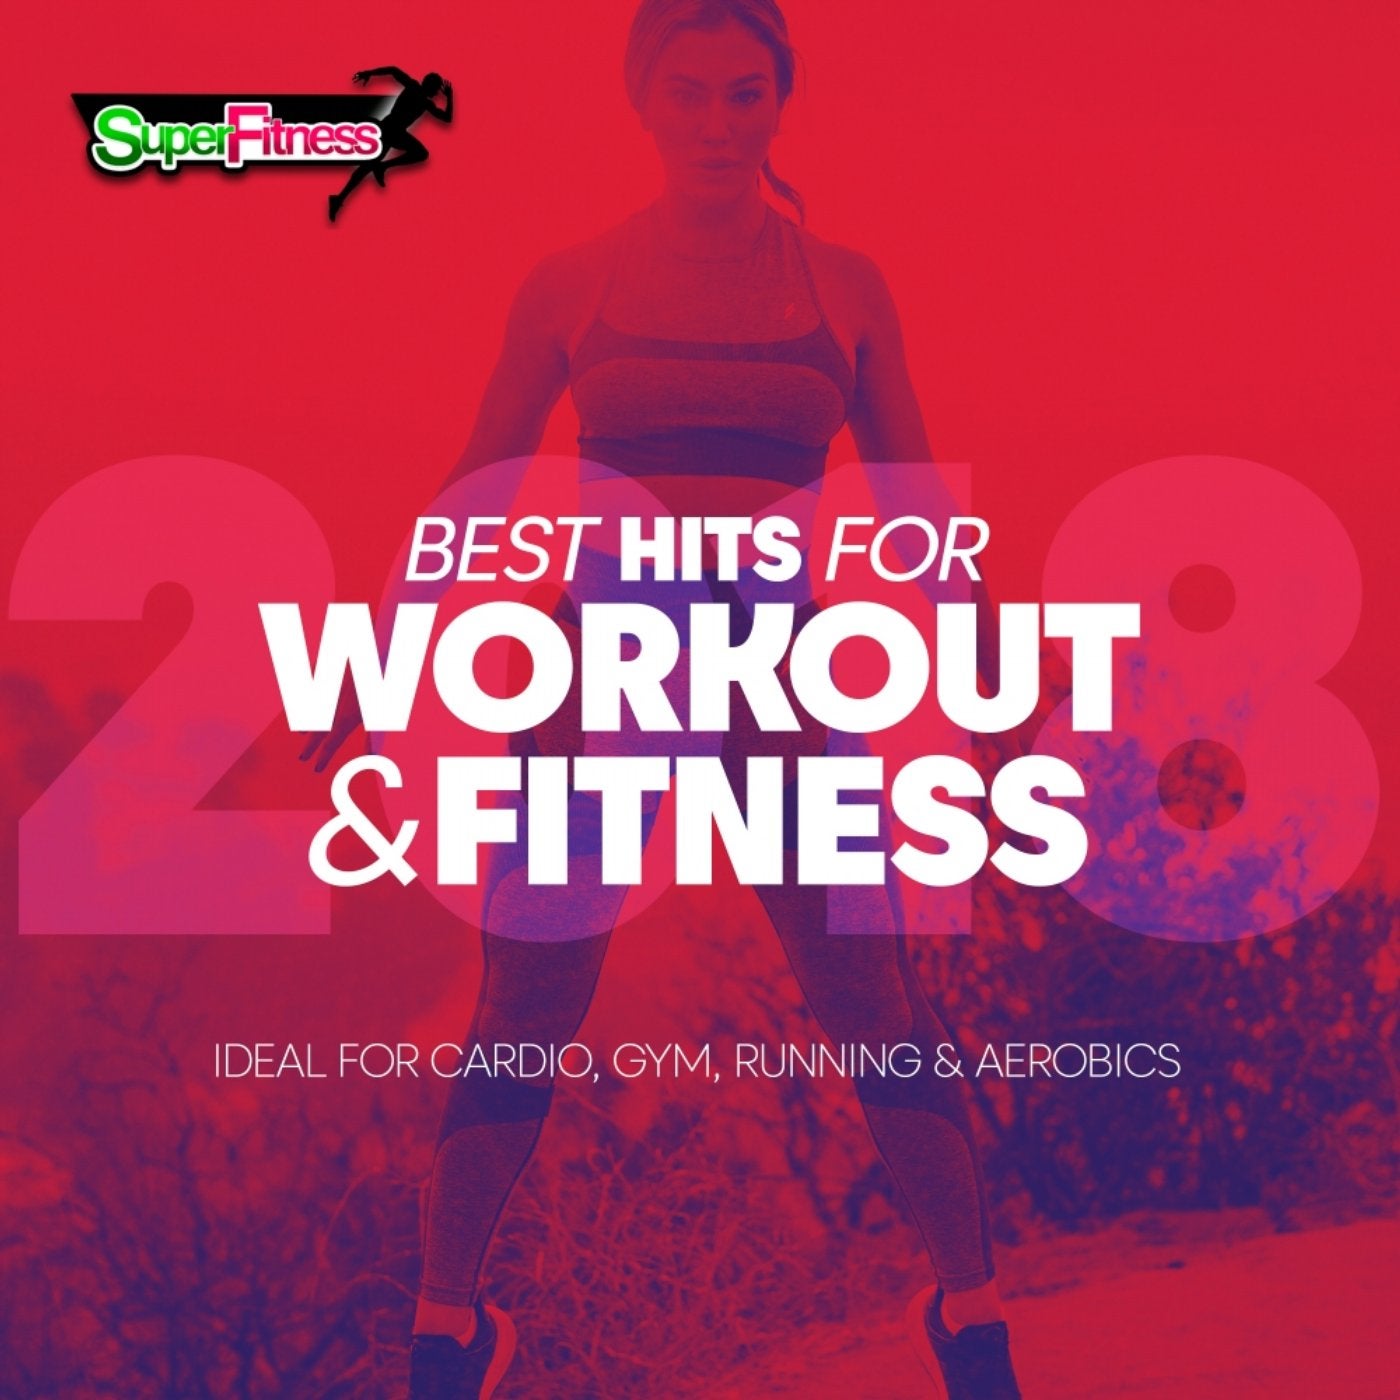 Best Hits For Workout & Fitness 2018 (Ideal For Cardio, Gym, Running & Aerobics)